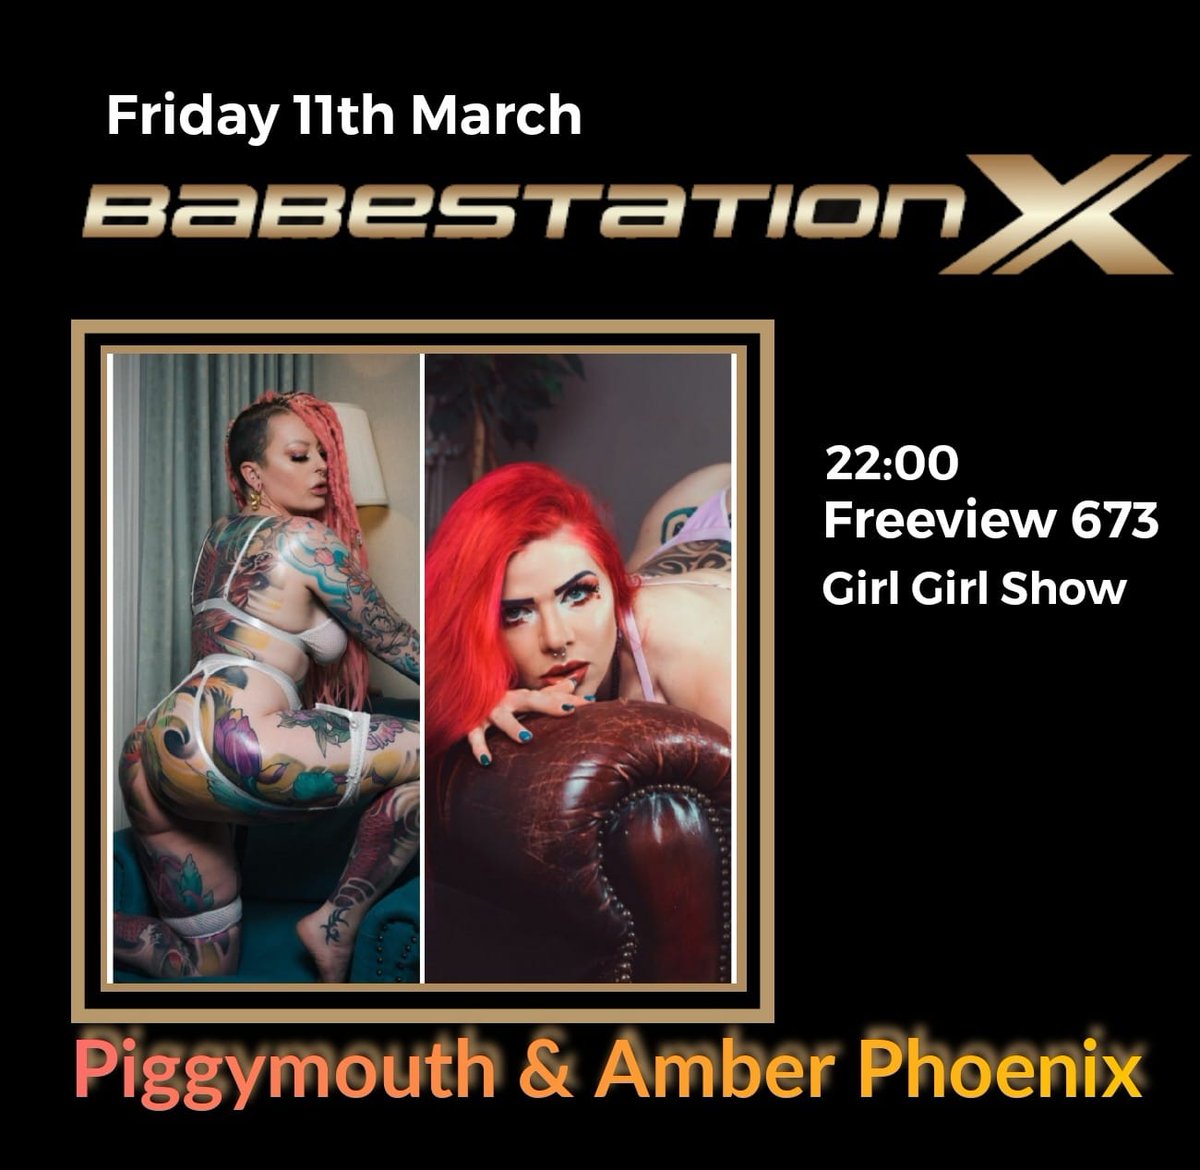 Tonight come and join @Amberfoxx1 &amp; @piggysmouth on cam from 22:00. https://t.co/95dv5GgS2P